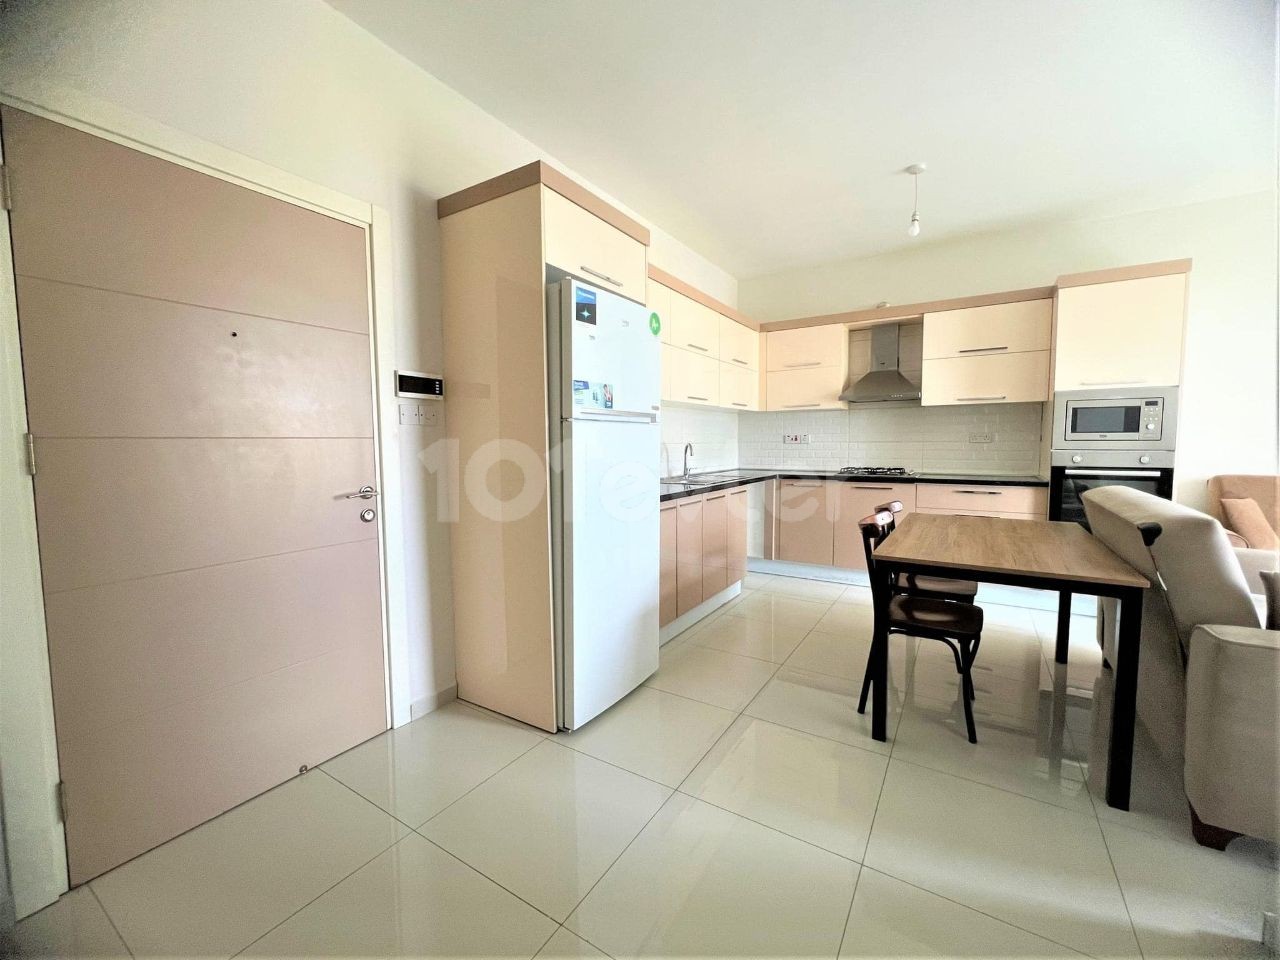 2+1 Clean Flat for Rent in Kaymaklı Area